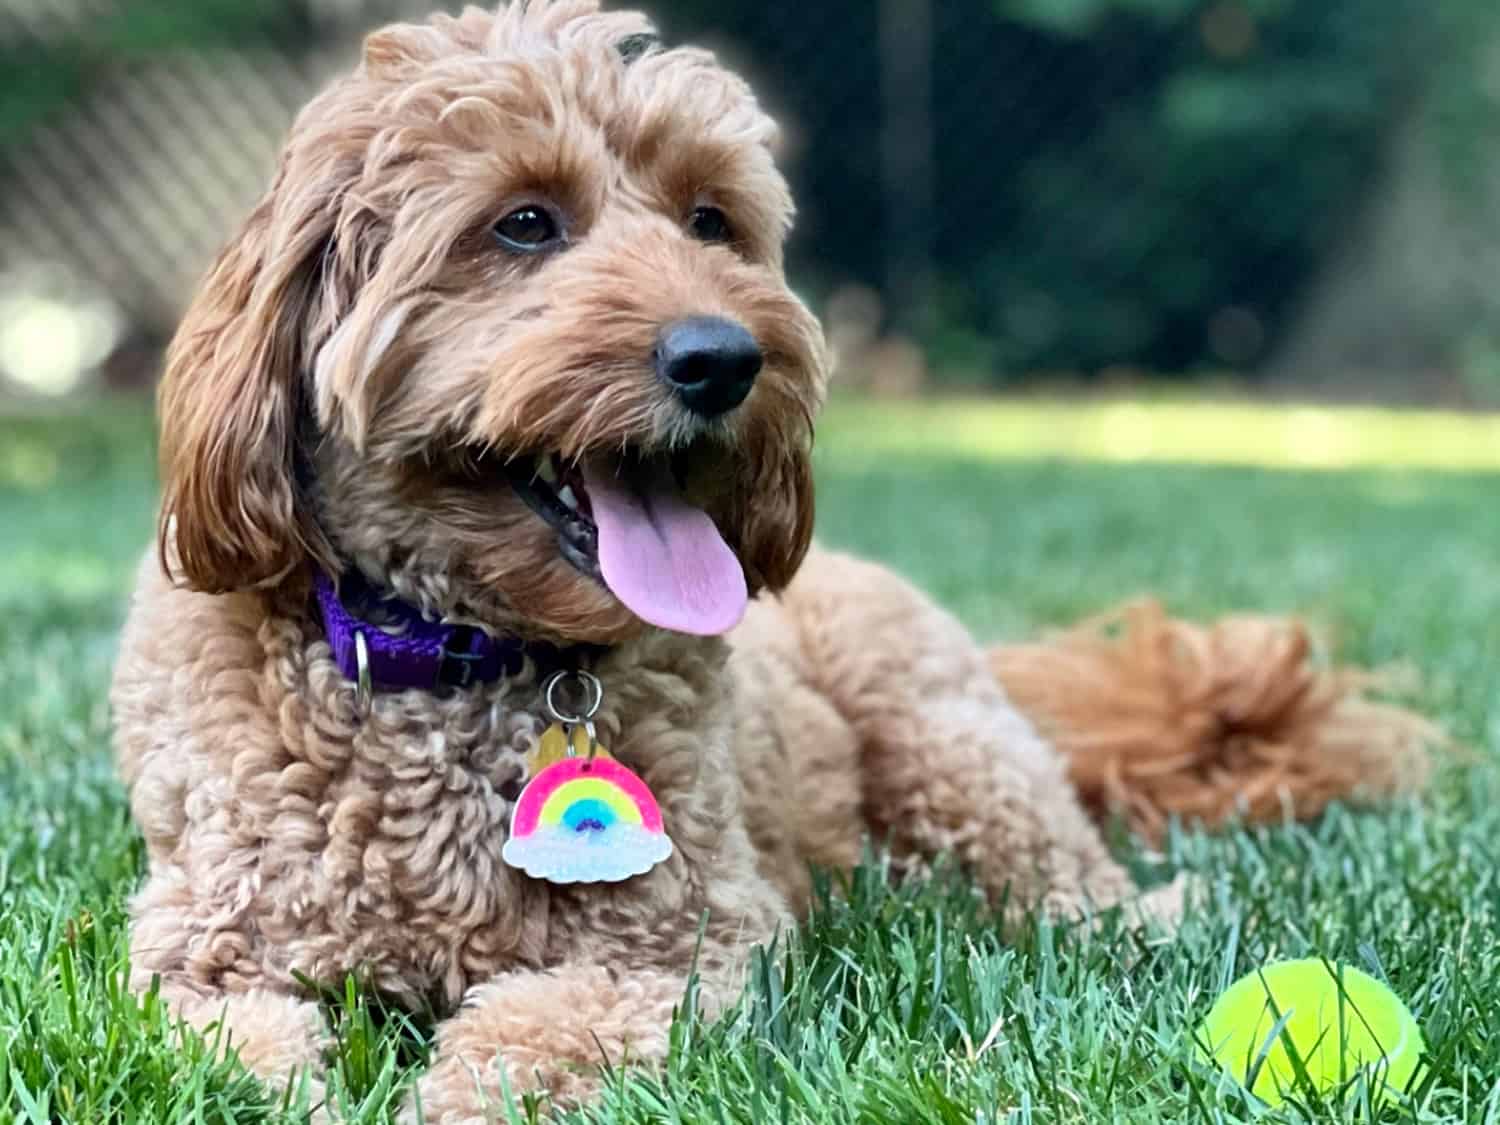 f1b mini goldendoodle sitting with tennis ball